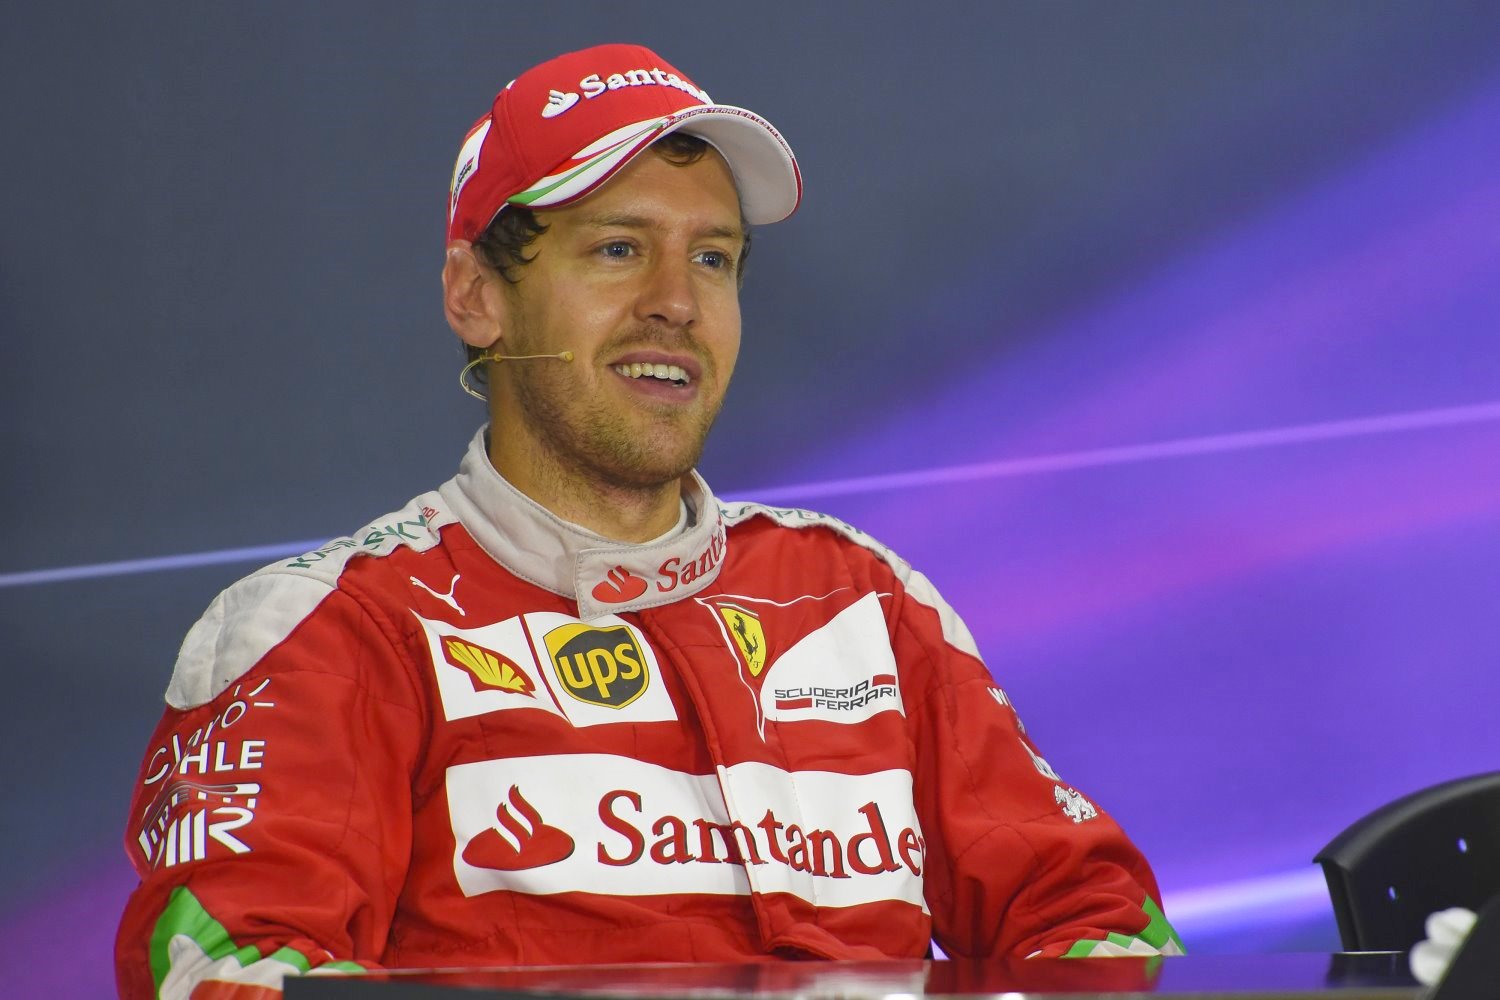 Vettel answers questions from media